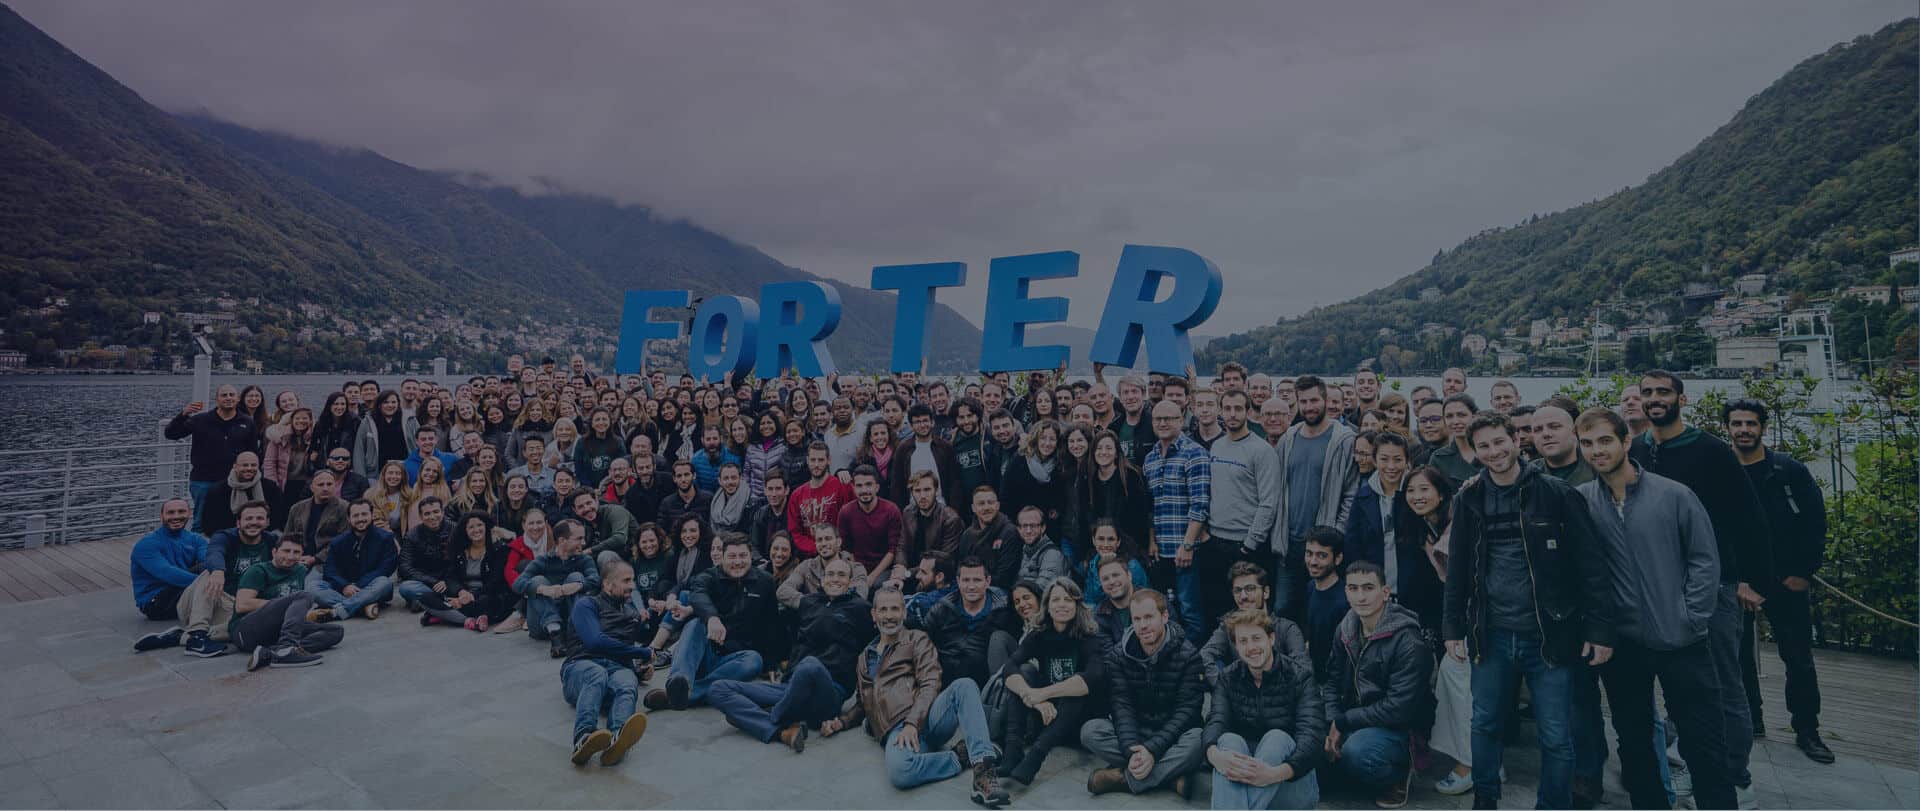 Forter Named to Inc.’s Best Workplaces 2020